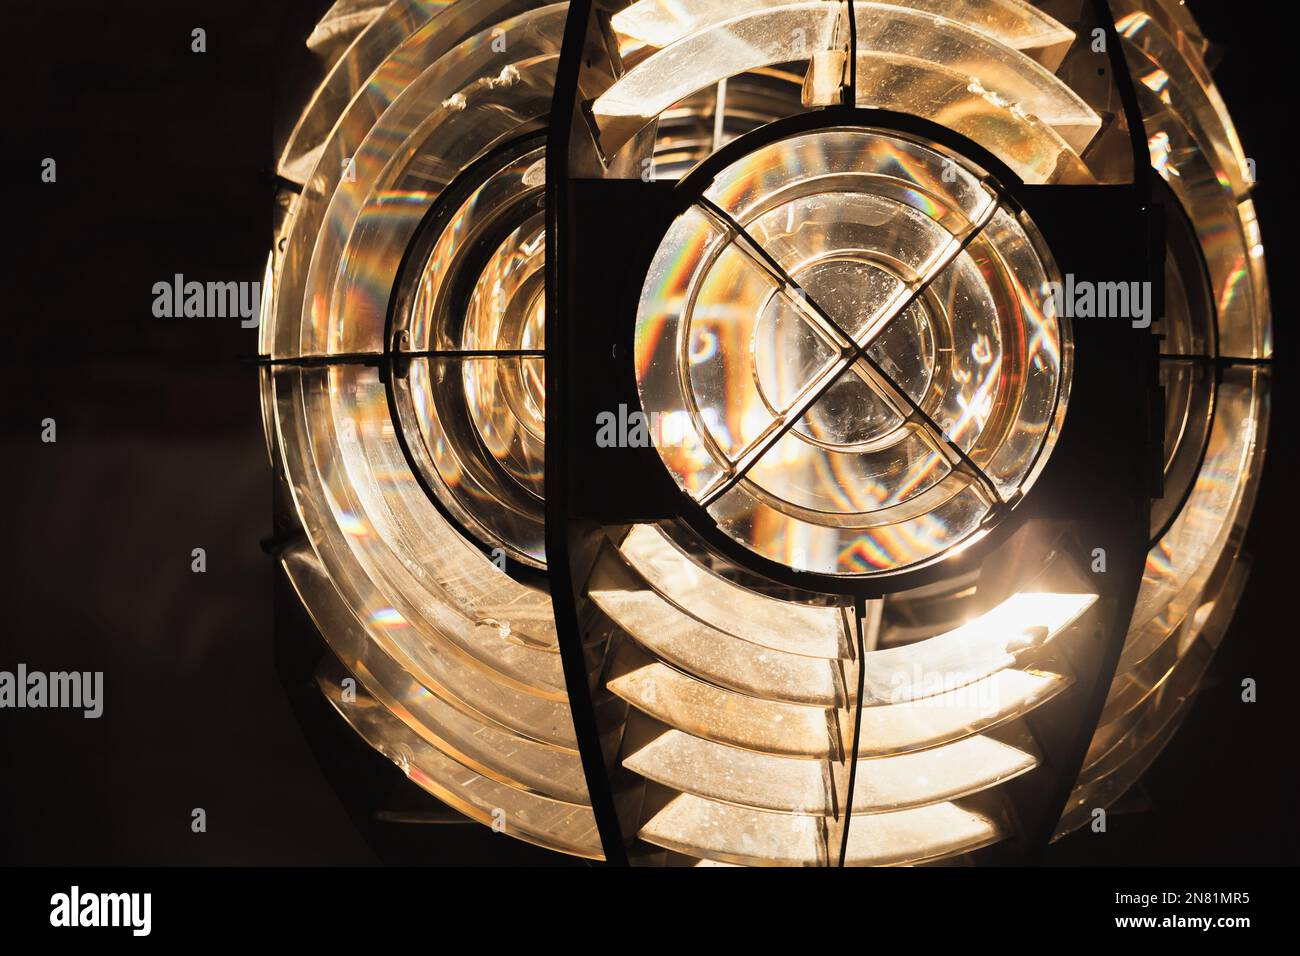 Close up photo.of a ;ighthouse lamp with a Fresnel lens. It is a type of composite compact lens developed by the French physicist Augustin-Jean Fresne Stock Photo